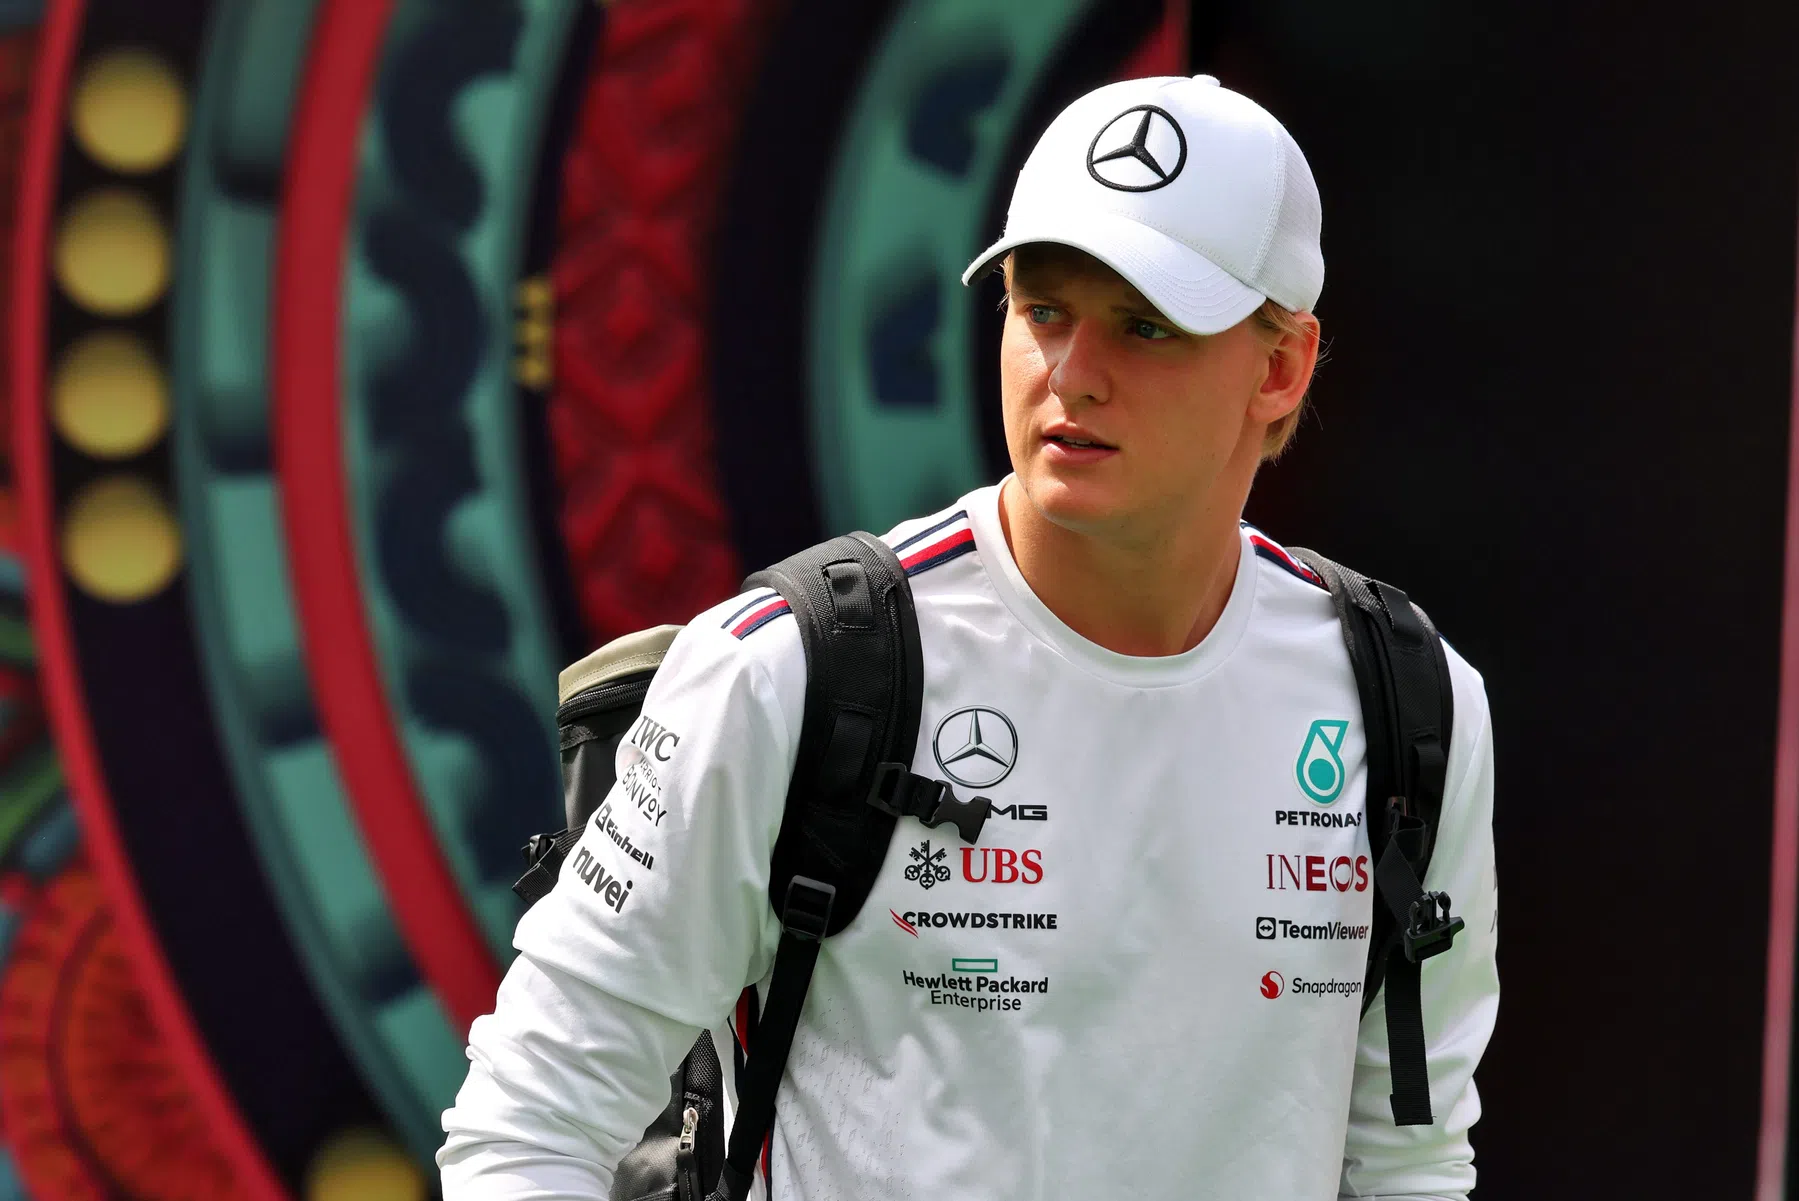 Mick Schumacher on his role as reserve driver